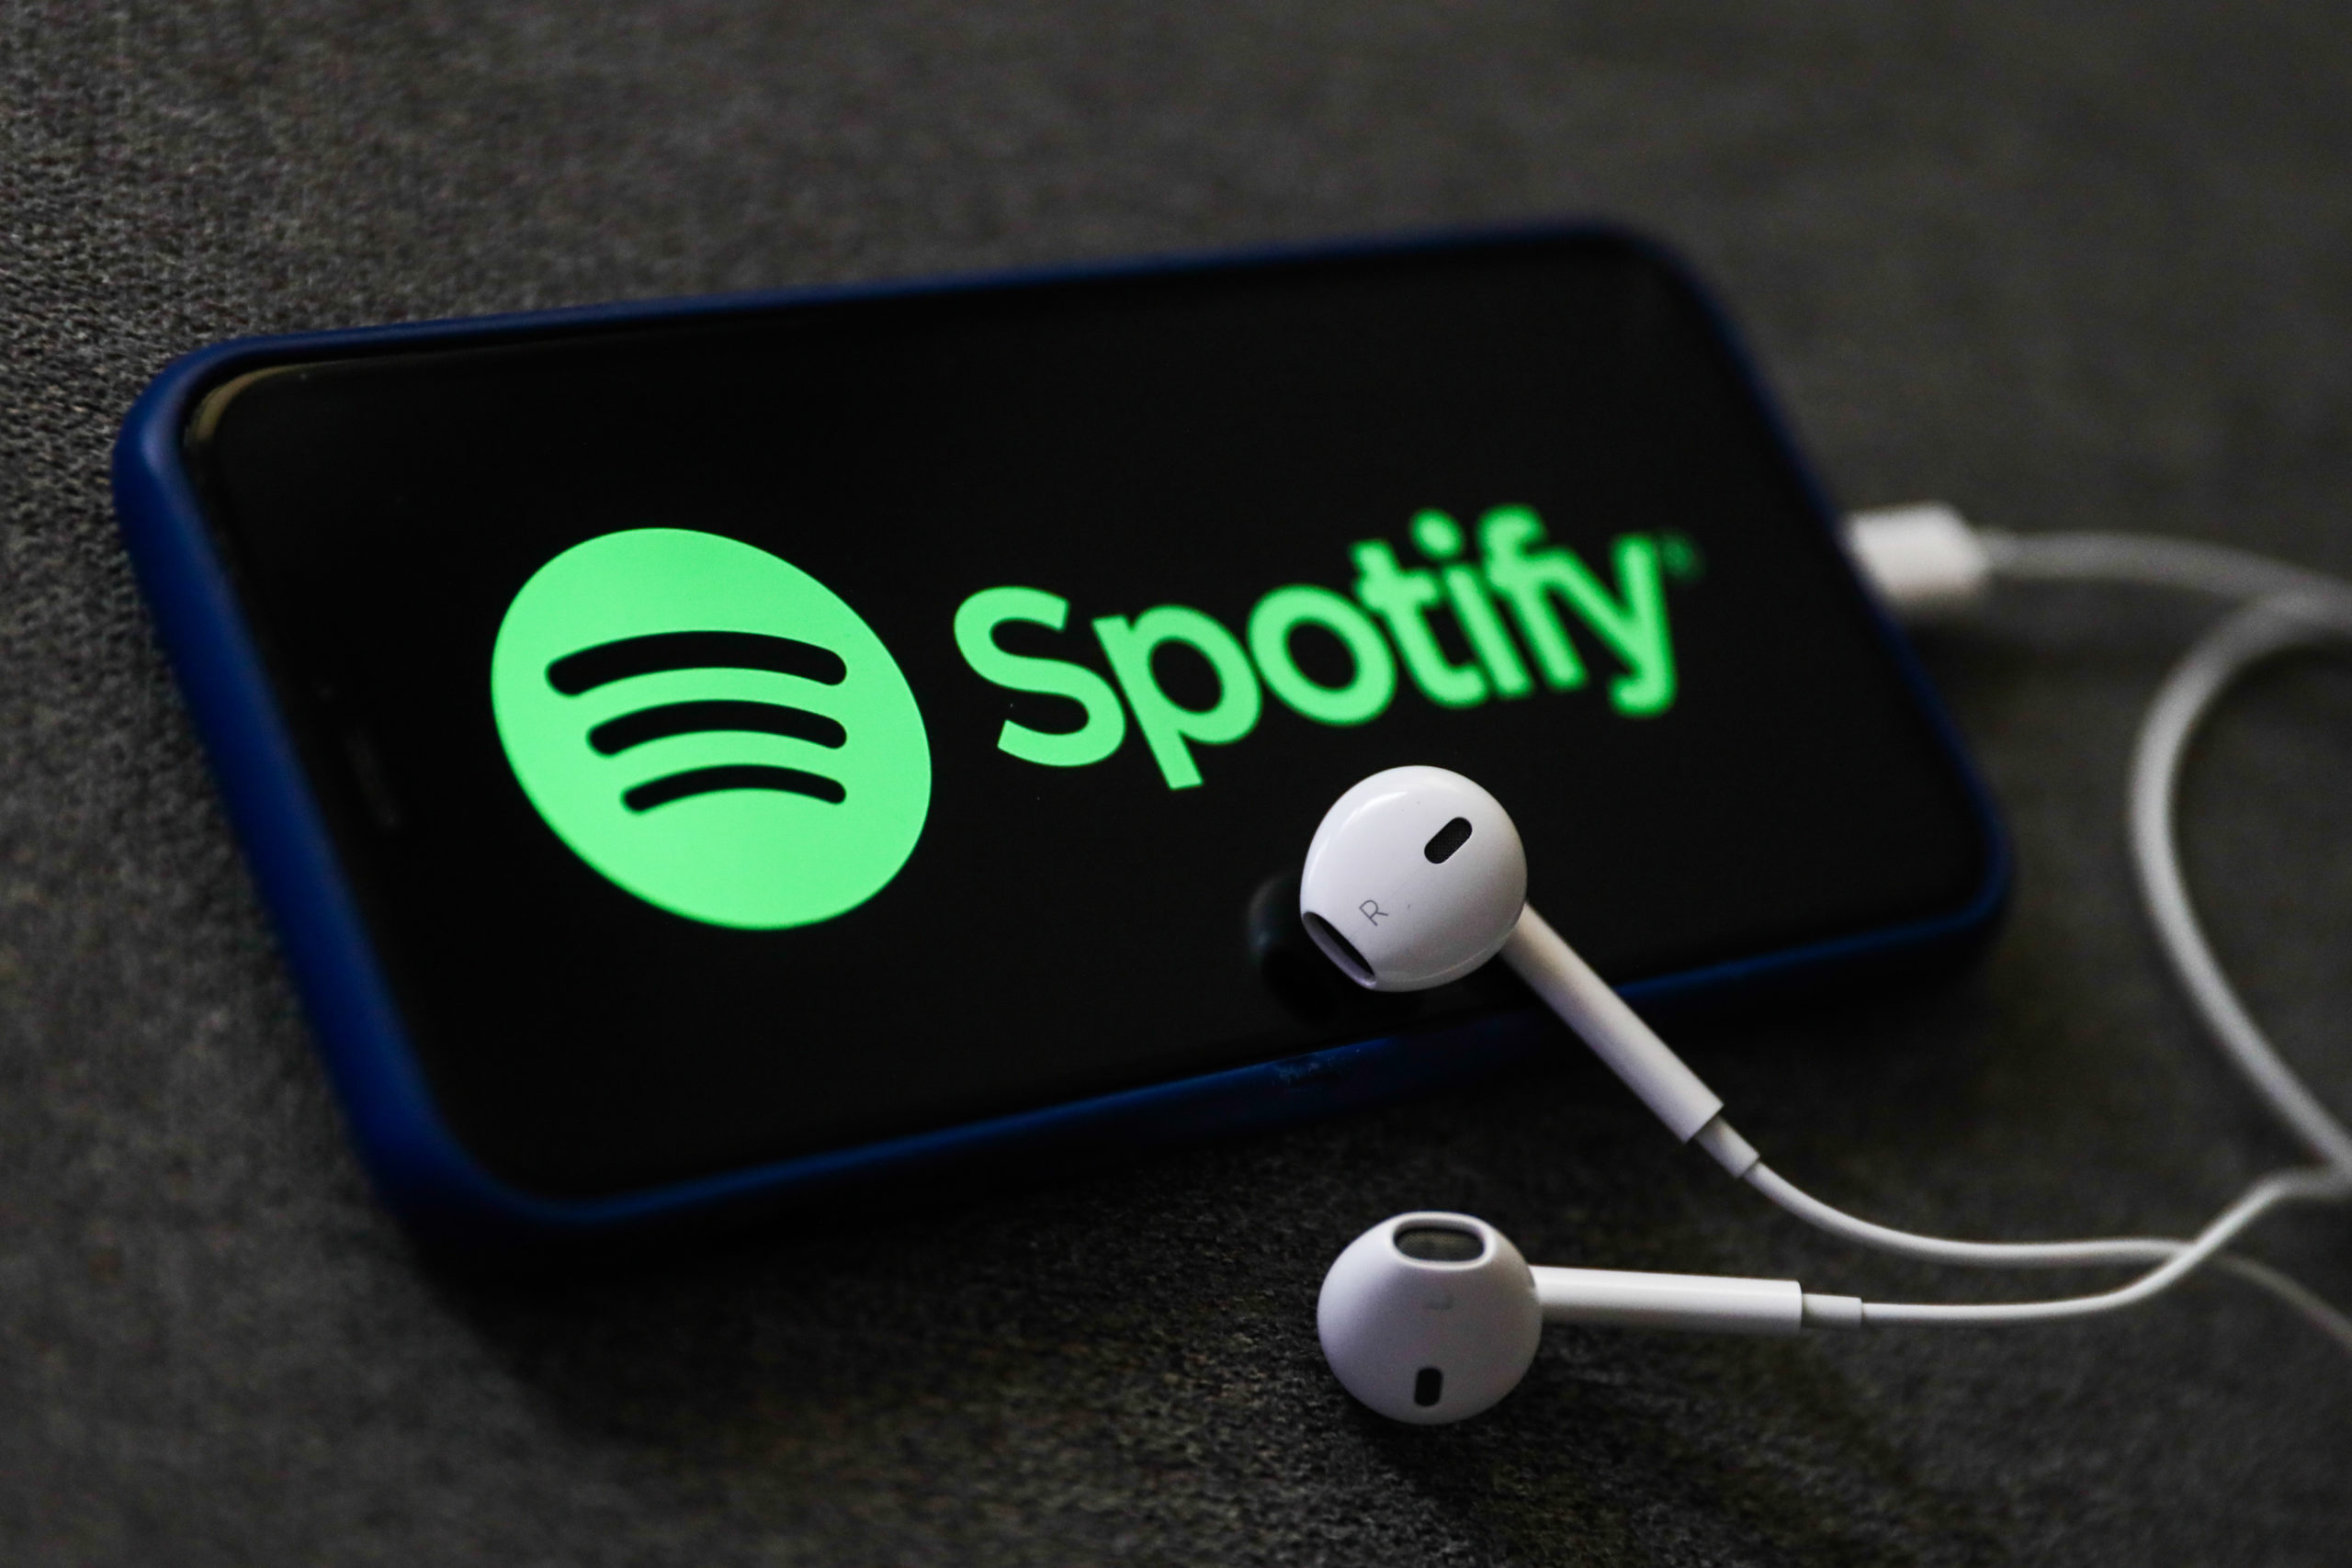 What is Receiptify? How to turn your Spotify faves into a shareable receipt